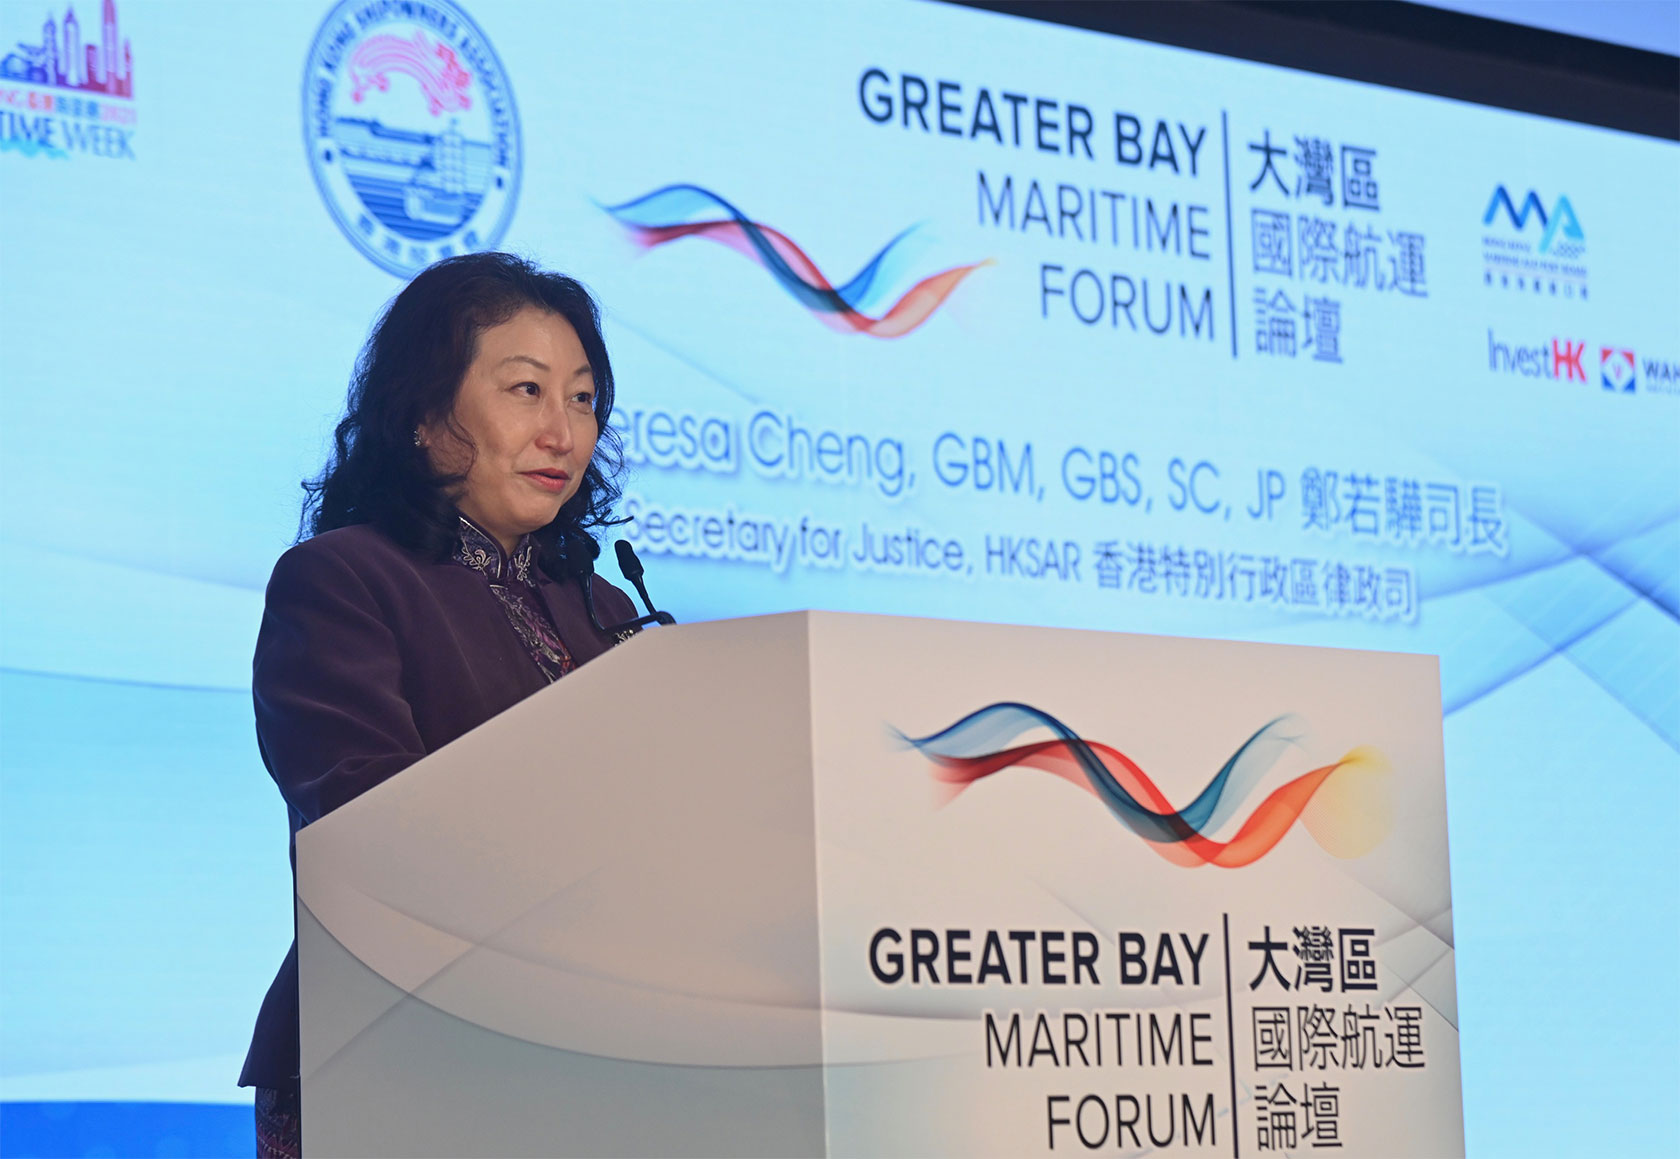 The Secretary for Justice, Ms Teresa Cheng, SC, speaks at the Greater Bay Maritime Forum - A Turning Point in the New Era under Hong Kong Legal Week 2021 today (November 1).